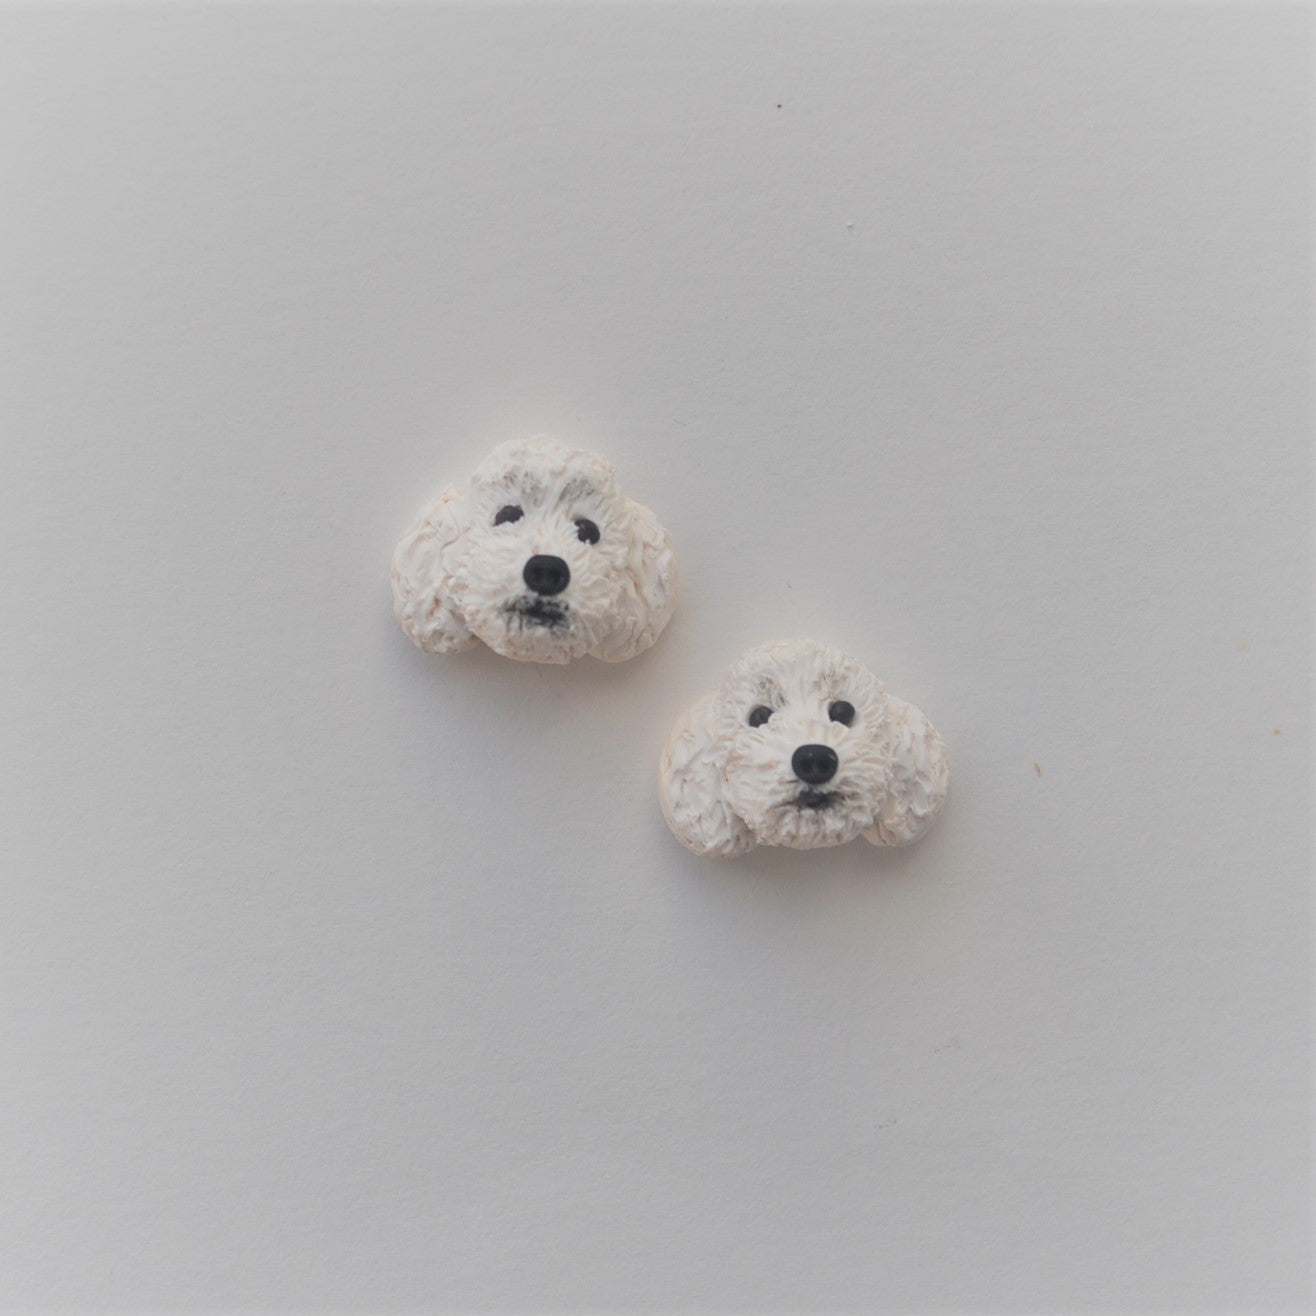 Handmade polymer clay white poodle stud earrings shown offset on white background